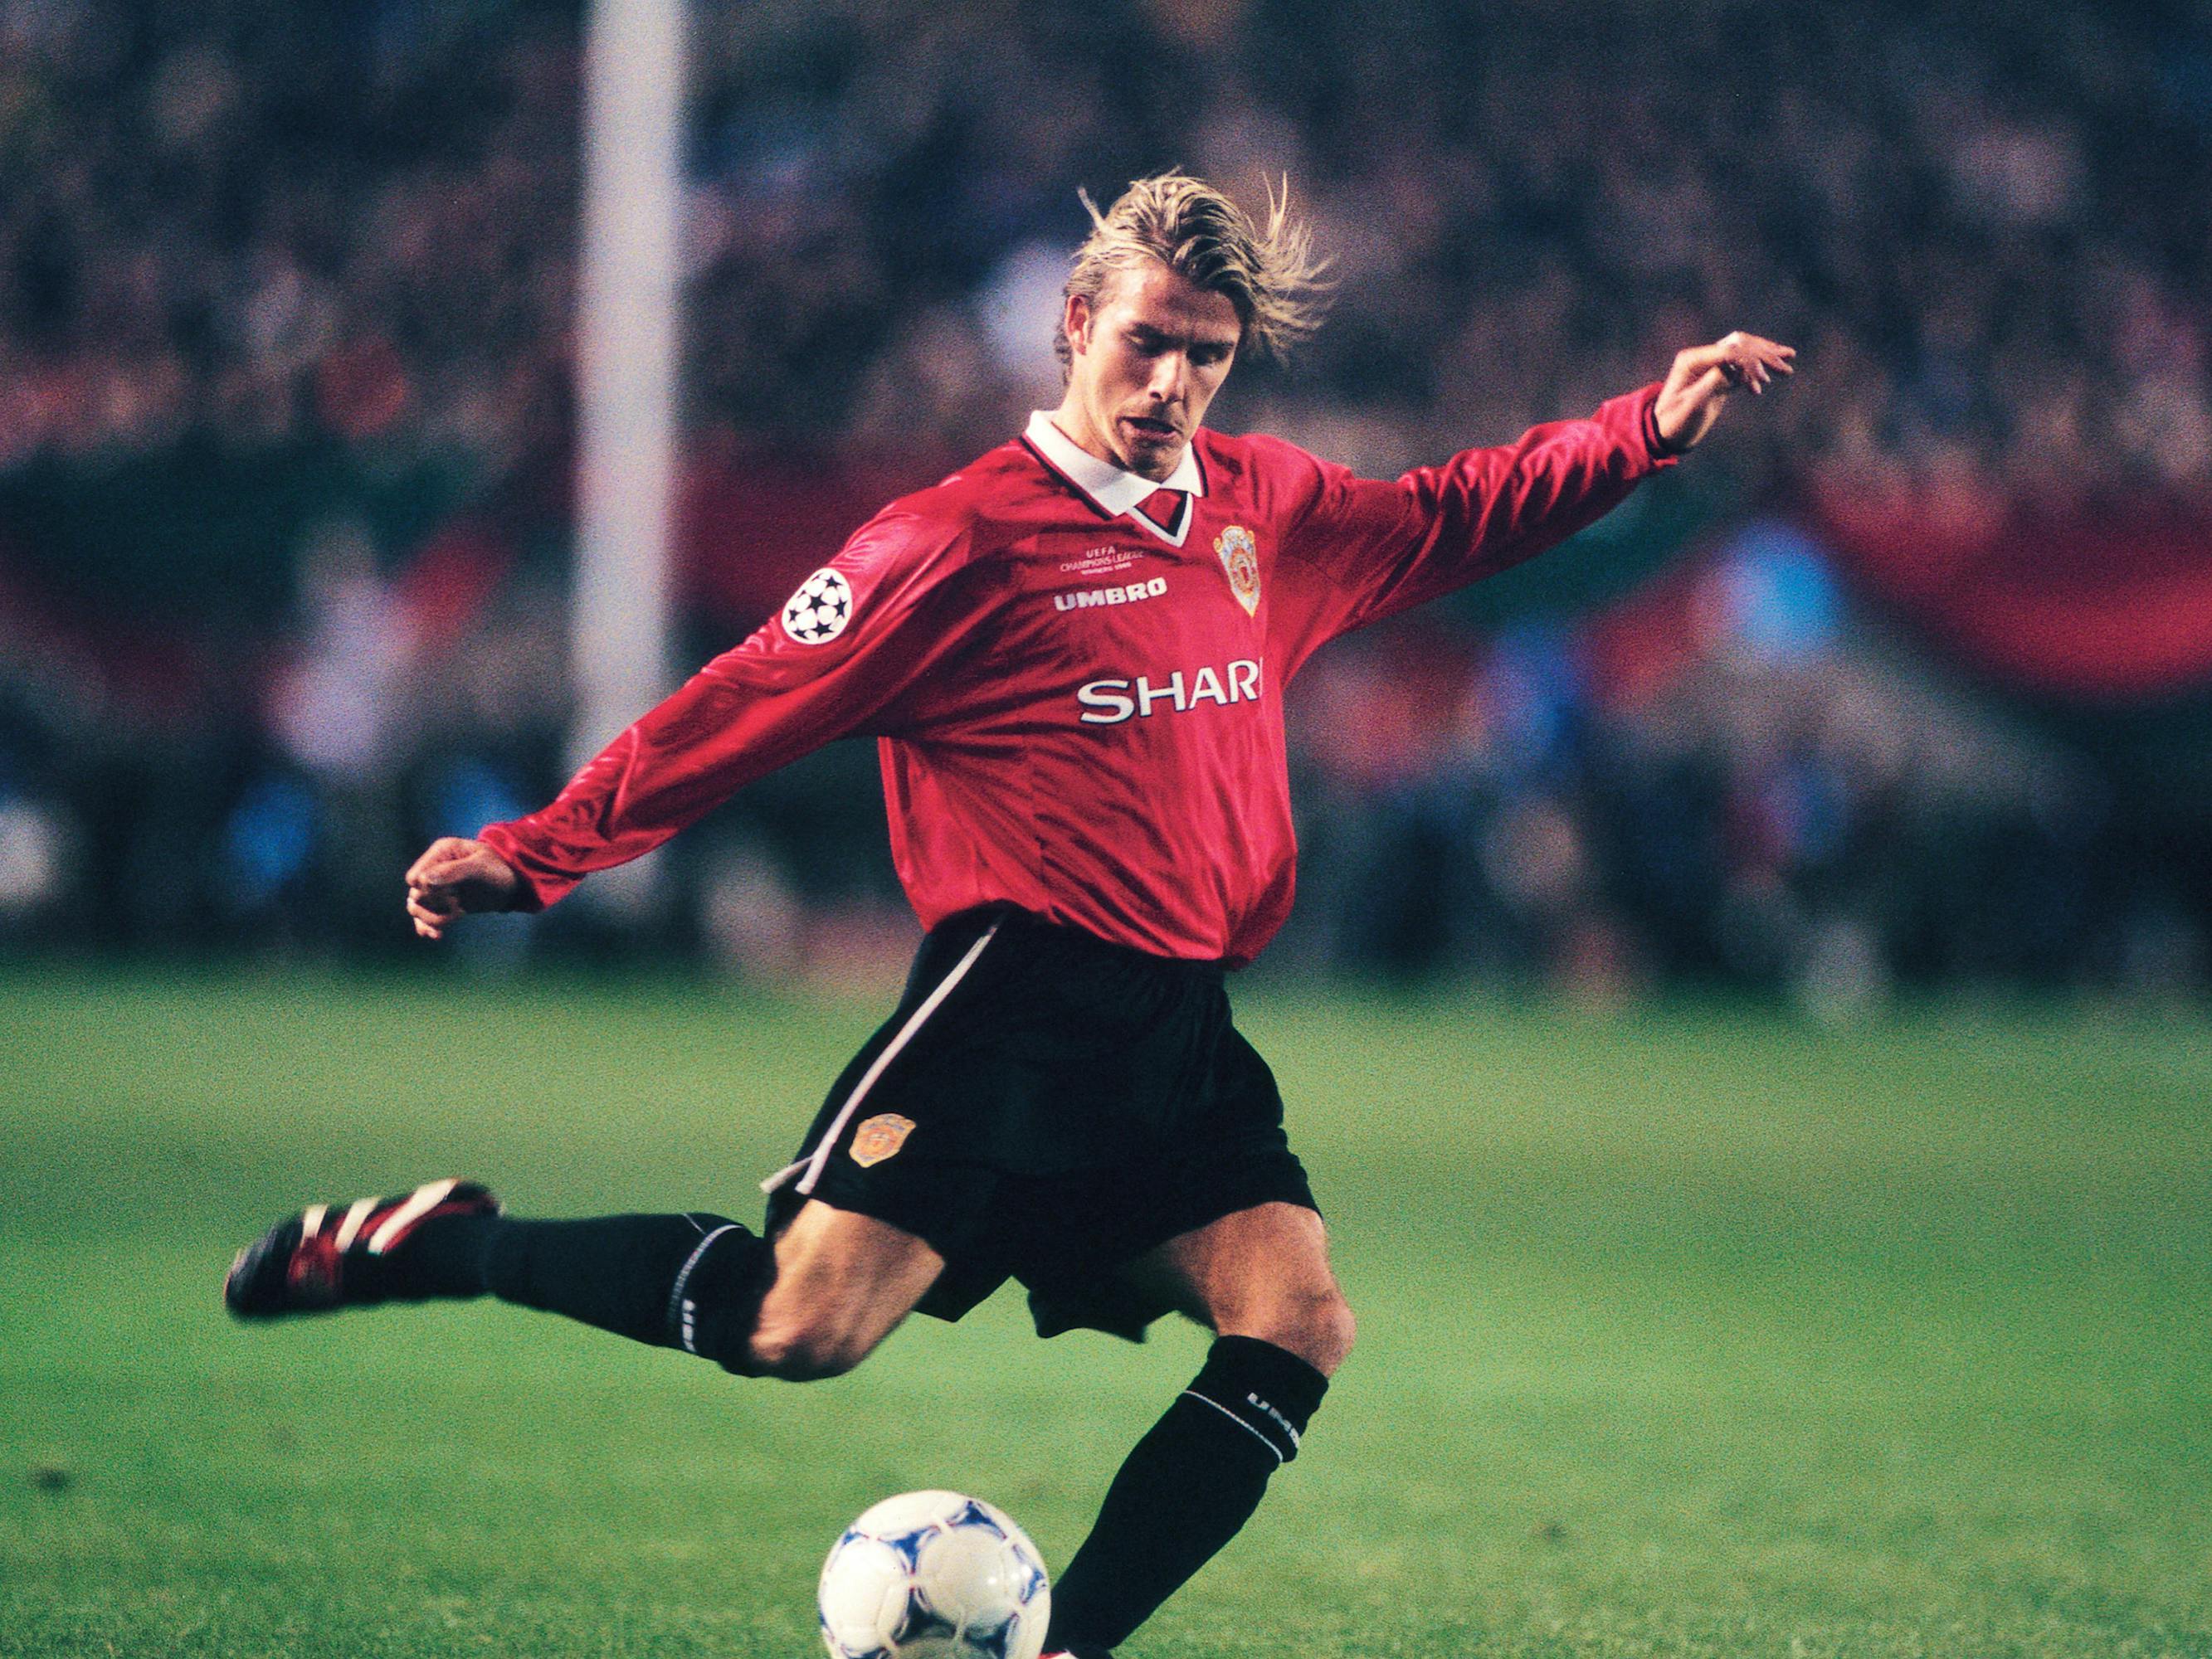 David Beckham wears a red jersey and black shorts and kicks a ball on a green soccer pitch.